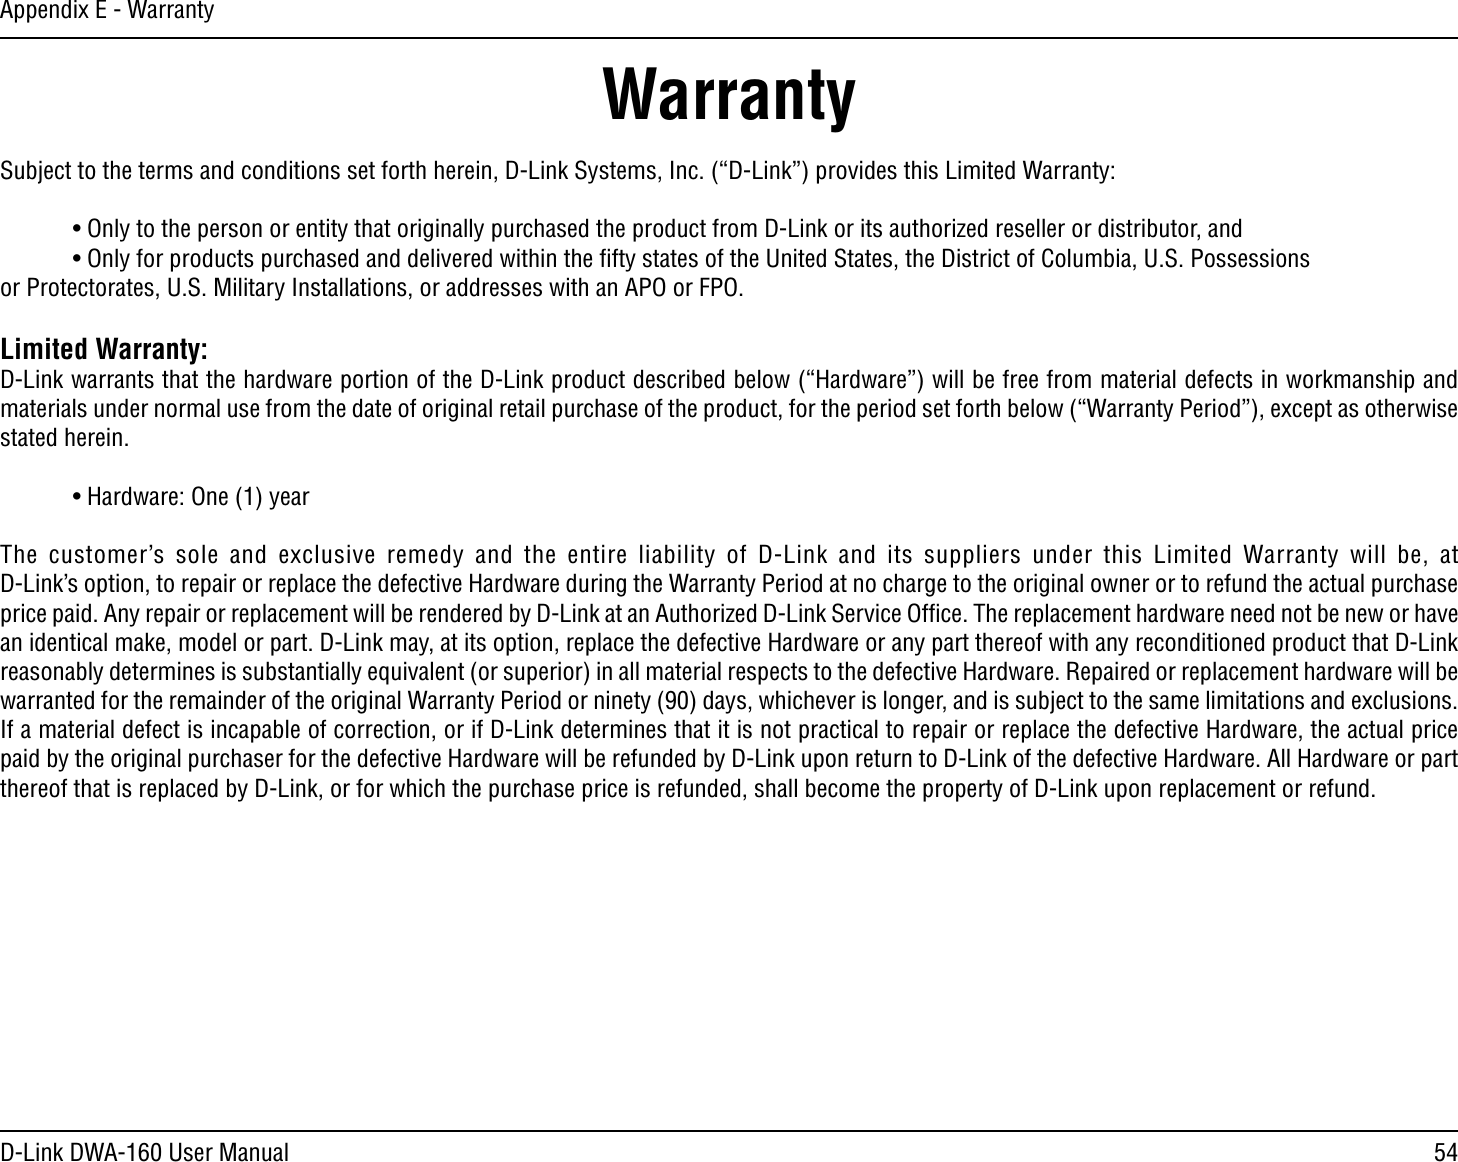 54D-Link DWA-160 User ManualAppendix E - WarrantyWarrantySubject to the terms and conditions set forth herein, D-Link Systems, Inc. (“D-Link”) provides this Limited Warranty: s/NLYTOTHEPERSONORENTITYTHATORIGINALLYPURCHASEDTHEPRODUCTFROM$,INKORITSAUTHORIZEDRESELLERORDISTRIBUTORAND s/NLYFORPRODUCTSPURCHASEDANDDELIVEREDWITHINTHElFTYSTATESOFTHE5NITED3TATESTHE$ISTRICTOF#OLUMBIA530OSSESSIONS  or Protectorates, U.S. Military Installations, or addresses with an APO or FPO.Limited Warranty:D-Link warrants that the hardware portion of the D-Link product described below (“Hardware”) will be free from material defects in workmanship and materials under normal use from the date of original retail purchase of the product, for the period set forth below (“Warranty Period”), except as otherwise stated herein. s(ARDWARE/NEYEAR4HE CUSTOMERS SOLE AND EXCLUSIVE REMEDY AND THE ENTIRE LIABILITY OF $,INK AND ITS SUPPLIERS UNDER THIS ,IMITED 7ARRANTY WILL BE AT $,INKSOPTIONTOREPAIRORREPLACETHEDEFECTIVE(ARDWAREDURINGTHE7ARRANTY0ERIODATNOCHARGETOTHEORIGINALOWNERORTOREFUNDTHEACTUALPURCHASEPRICEPAID!NYREPAIRORREPLACEMENTWILLBERENDEREDBY$,INKATAN!UTHORIZED$,INK3ERVICE/FlCE4HEREPLACEMENTHARDWARENEEDNOTBENEWORHAVEan identical make, model or part. D-Link may, at its option, replace the defective Hardware or any part thereof with any reconditioned product that D-Link reasonably determines is substantially equivalent (or superior) in all material respects to the defective Hardware. Repaired or replacement hardware will be warranted for the remainder of the original Warranty Period or ninety (90) days, whichever is longer, and is subject to the same limitations and exclusions. If a material defect is incapable of correction, or if D-Link determines that it is not practical to repair or replace the defective Hardware, the actual price paid by the original purchaser for the defective Hardware will be refunded by D-Link upon return to D-Link of the defective Hardware. All Hardware or part thereof that is replaced by D-Link, or for which the purchase price is refunded, shall become the property of D-Link upon replacement or refund.